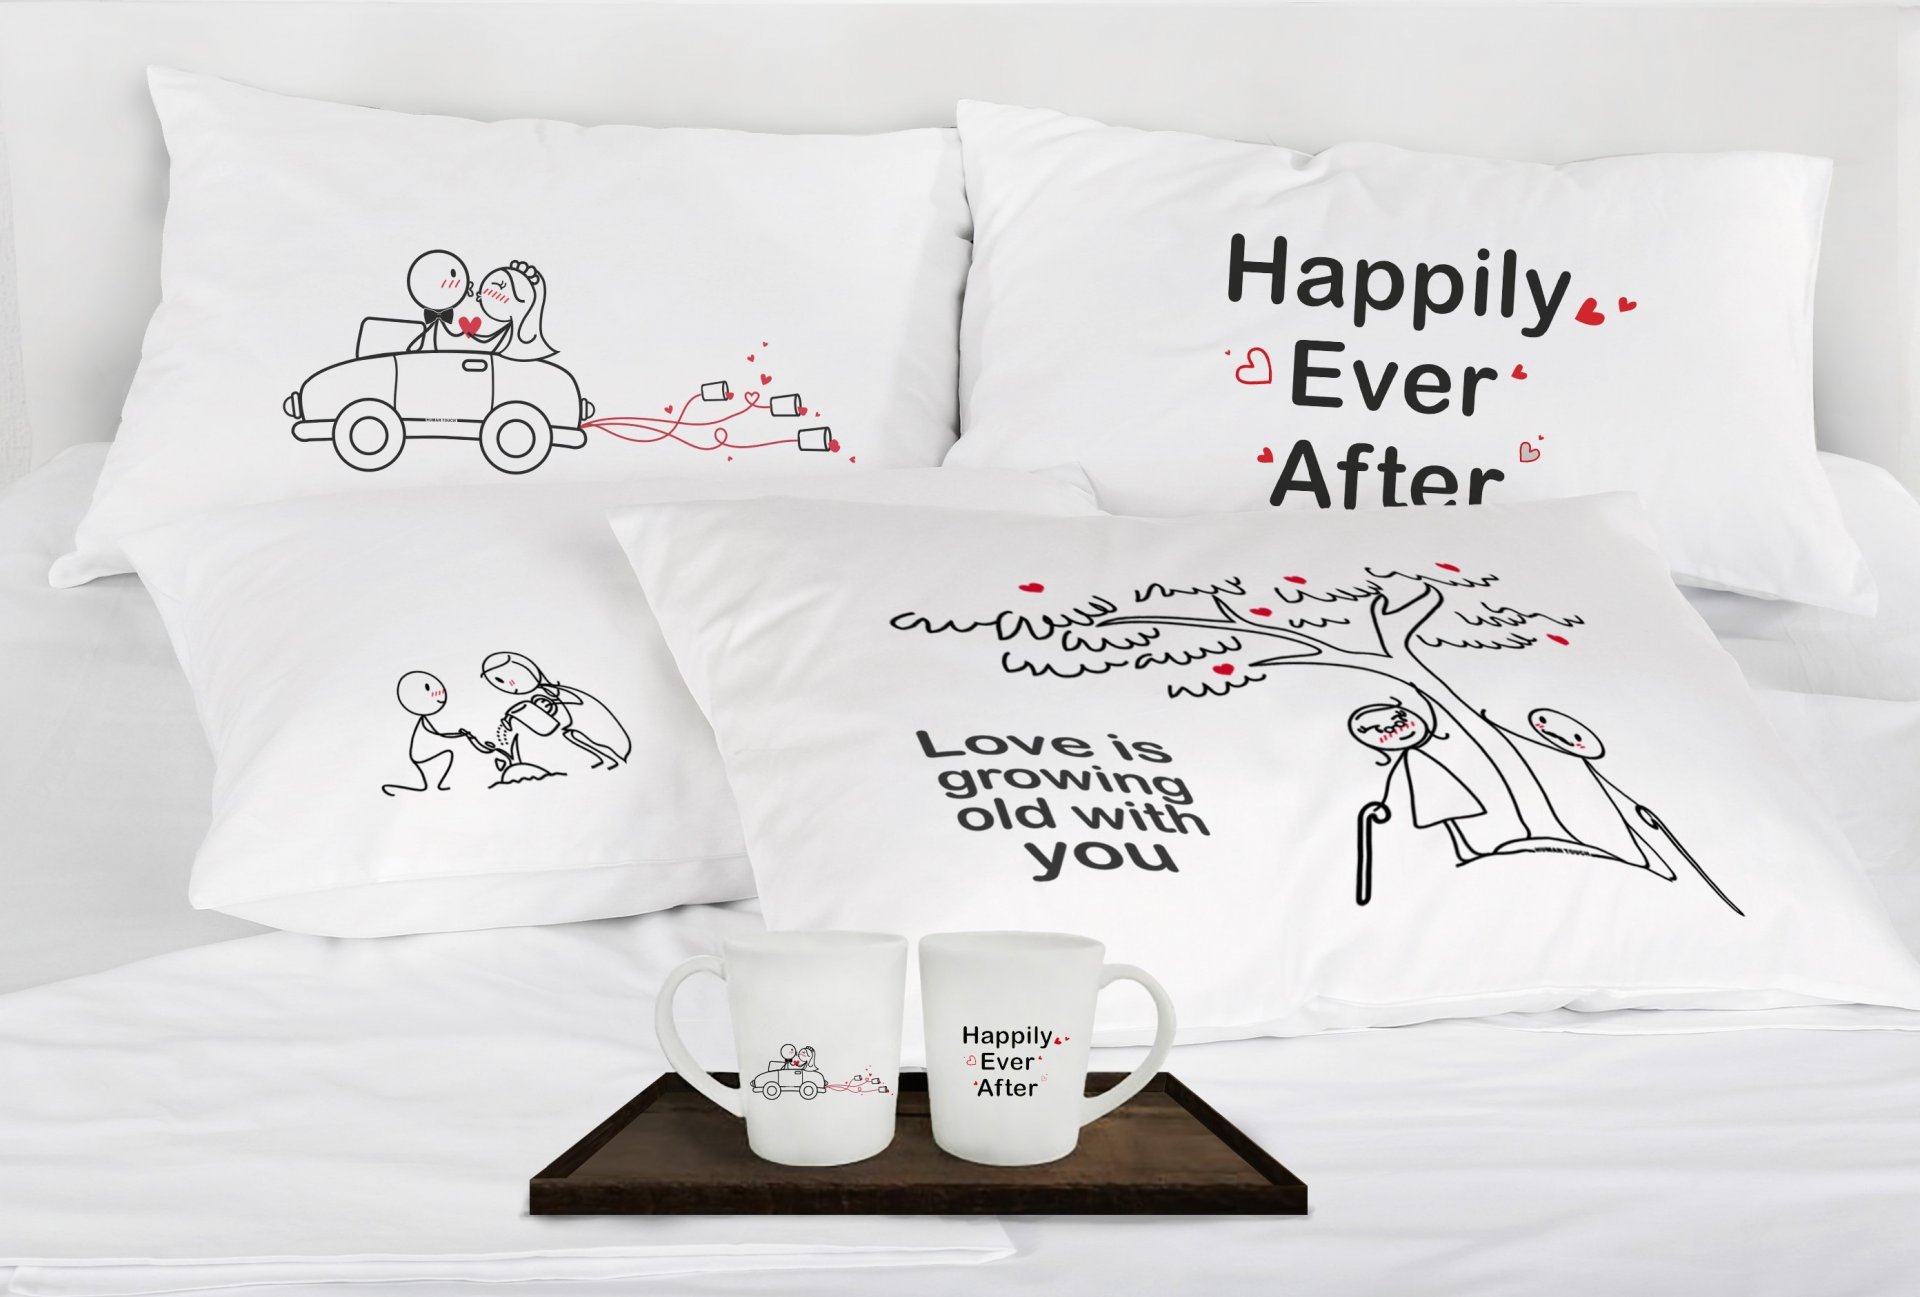 Happily ever after giftset